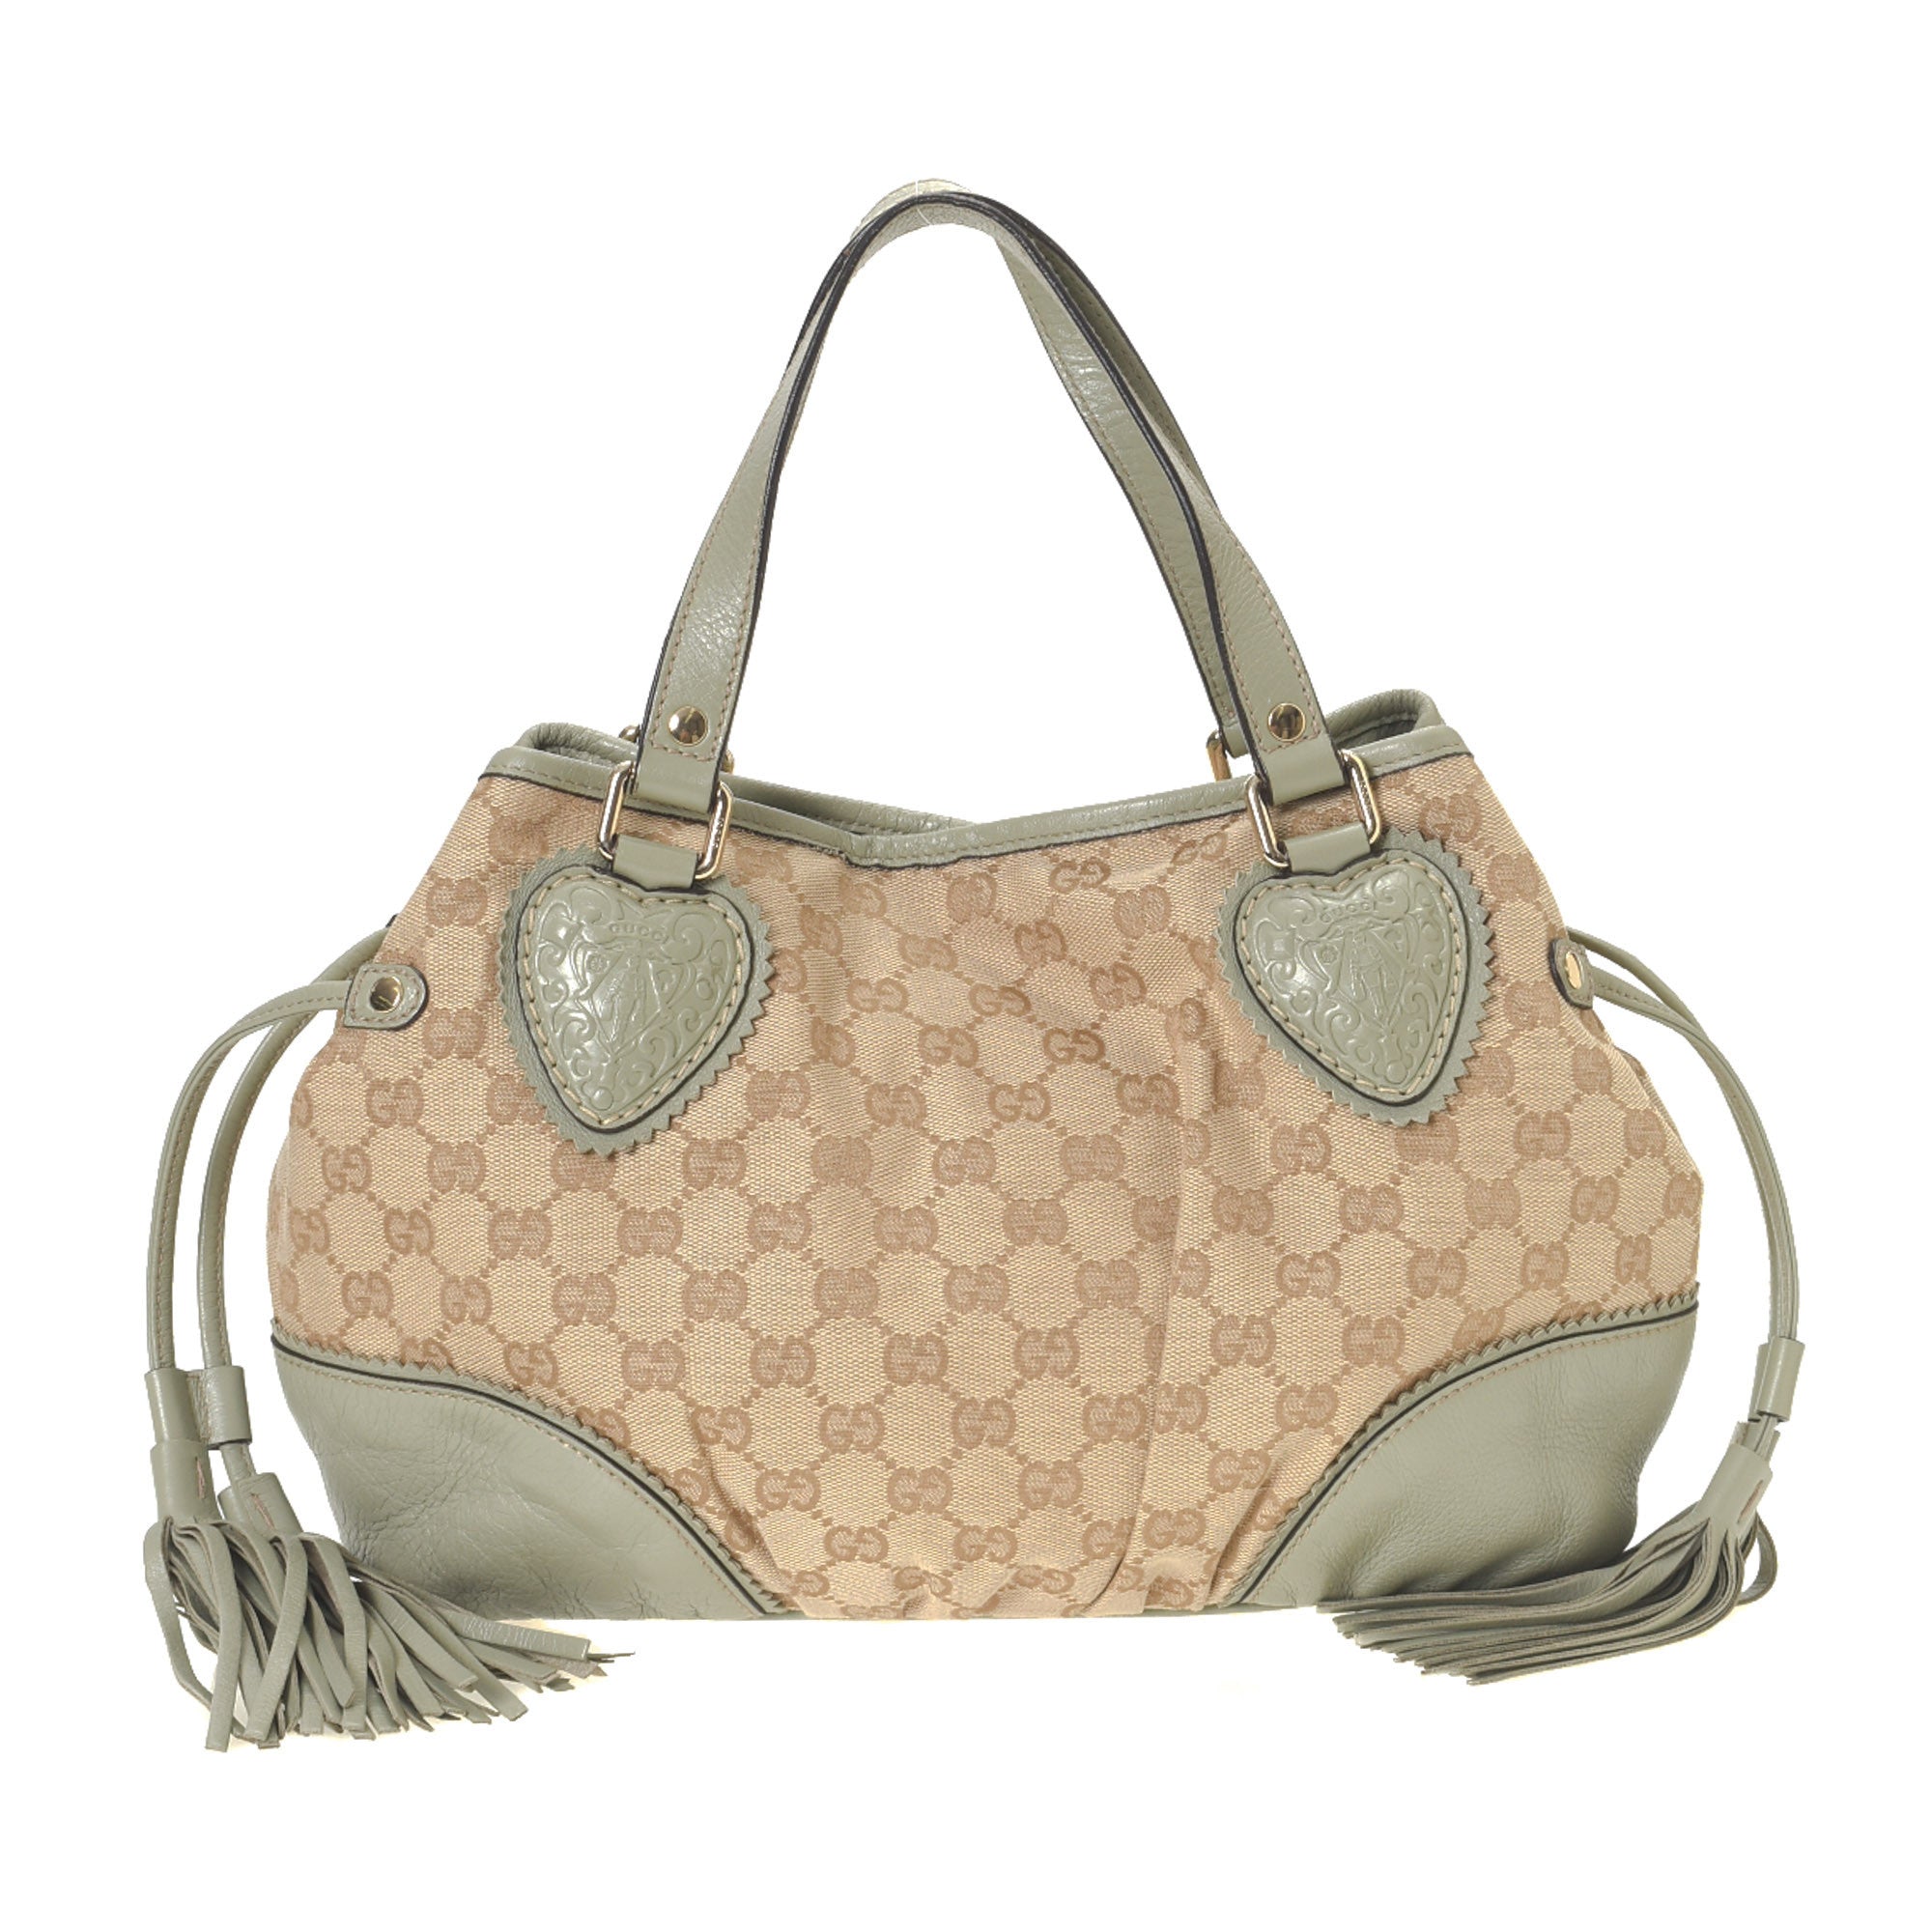 Authentic Gucci Beige Guccissima Leather Babouska Heart Tote Bag